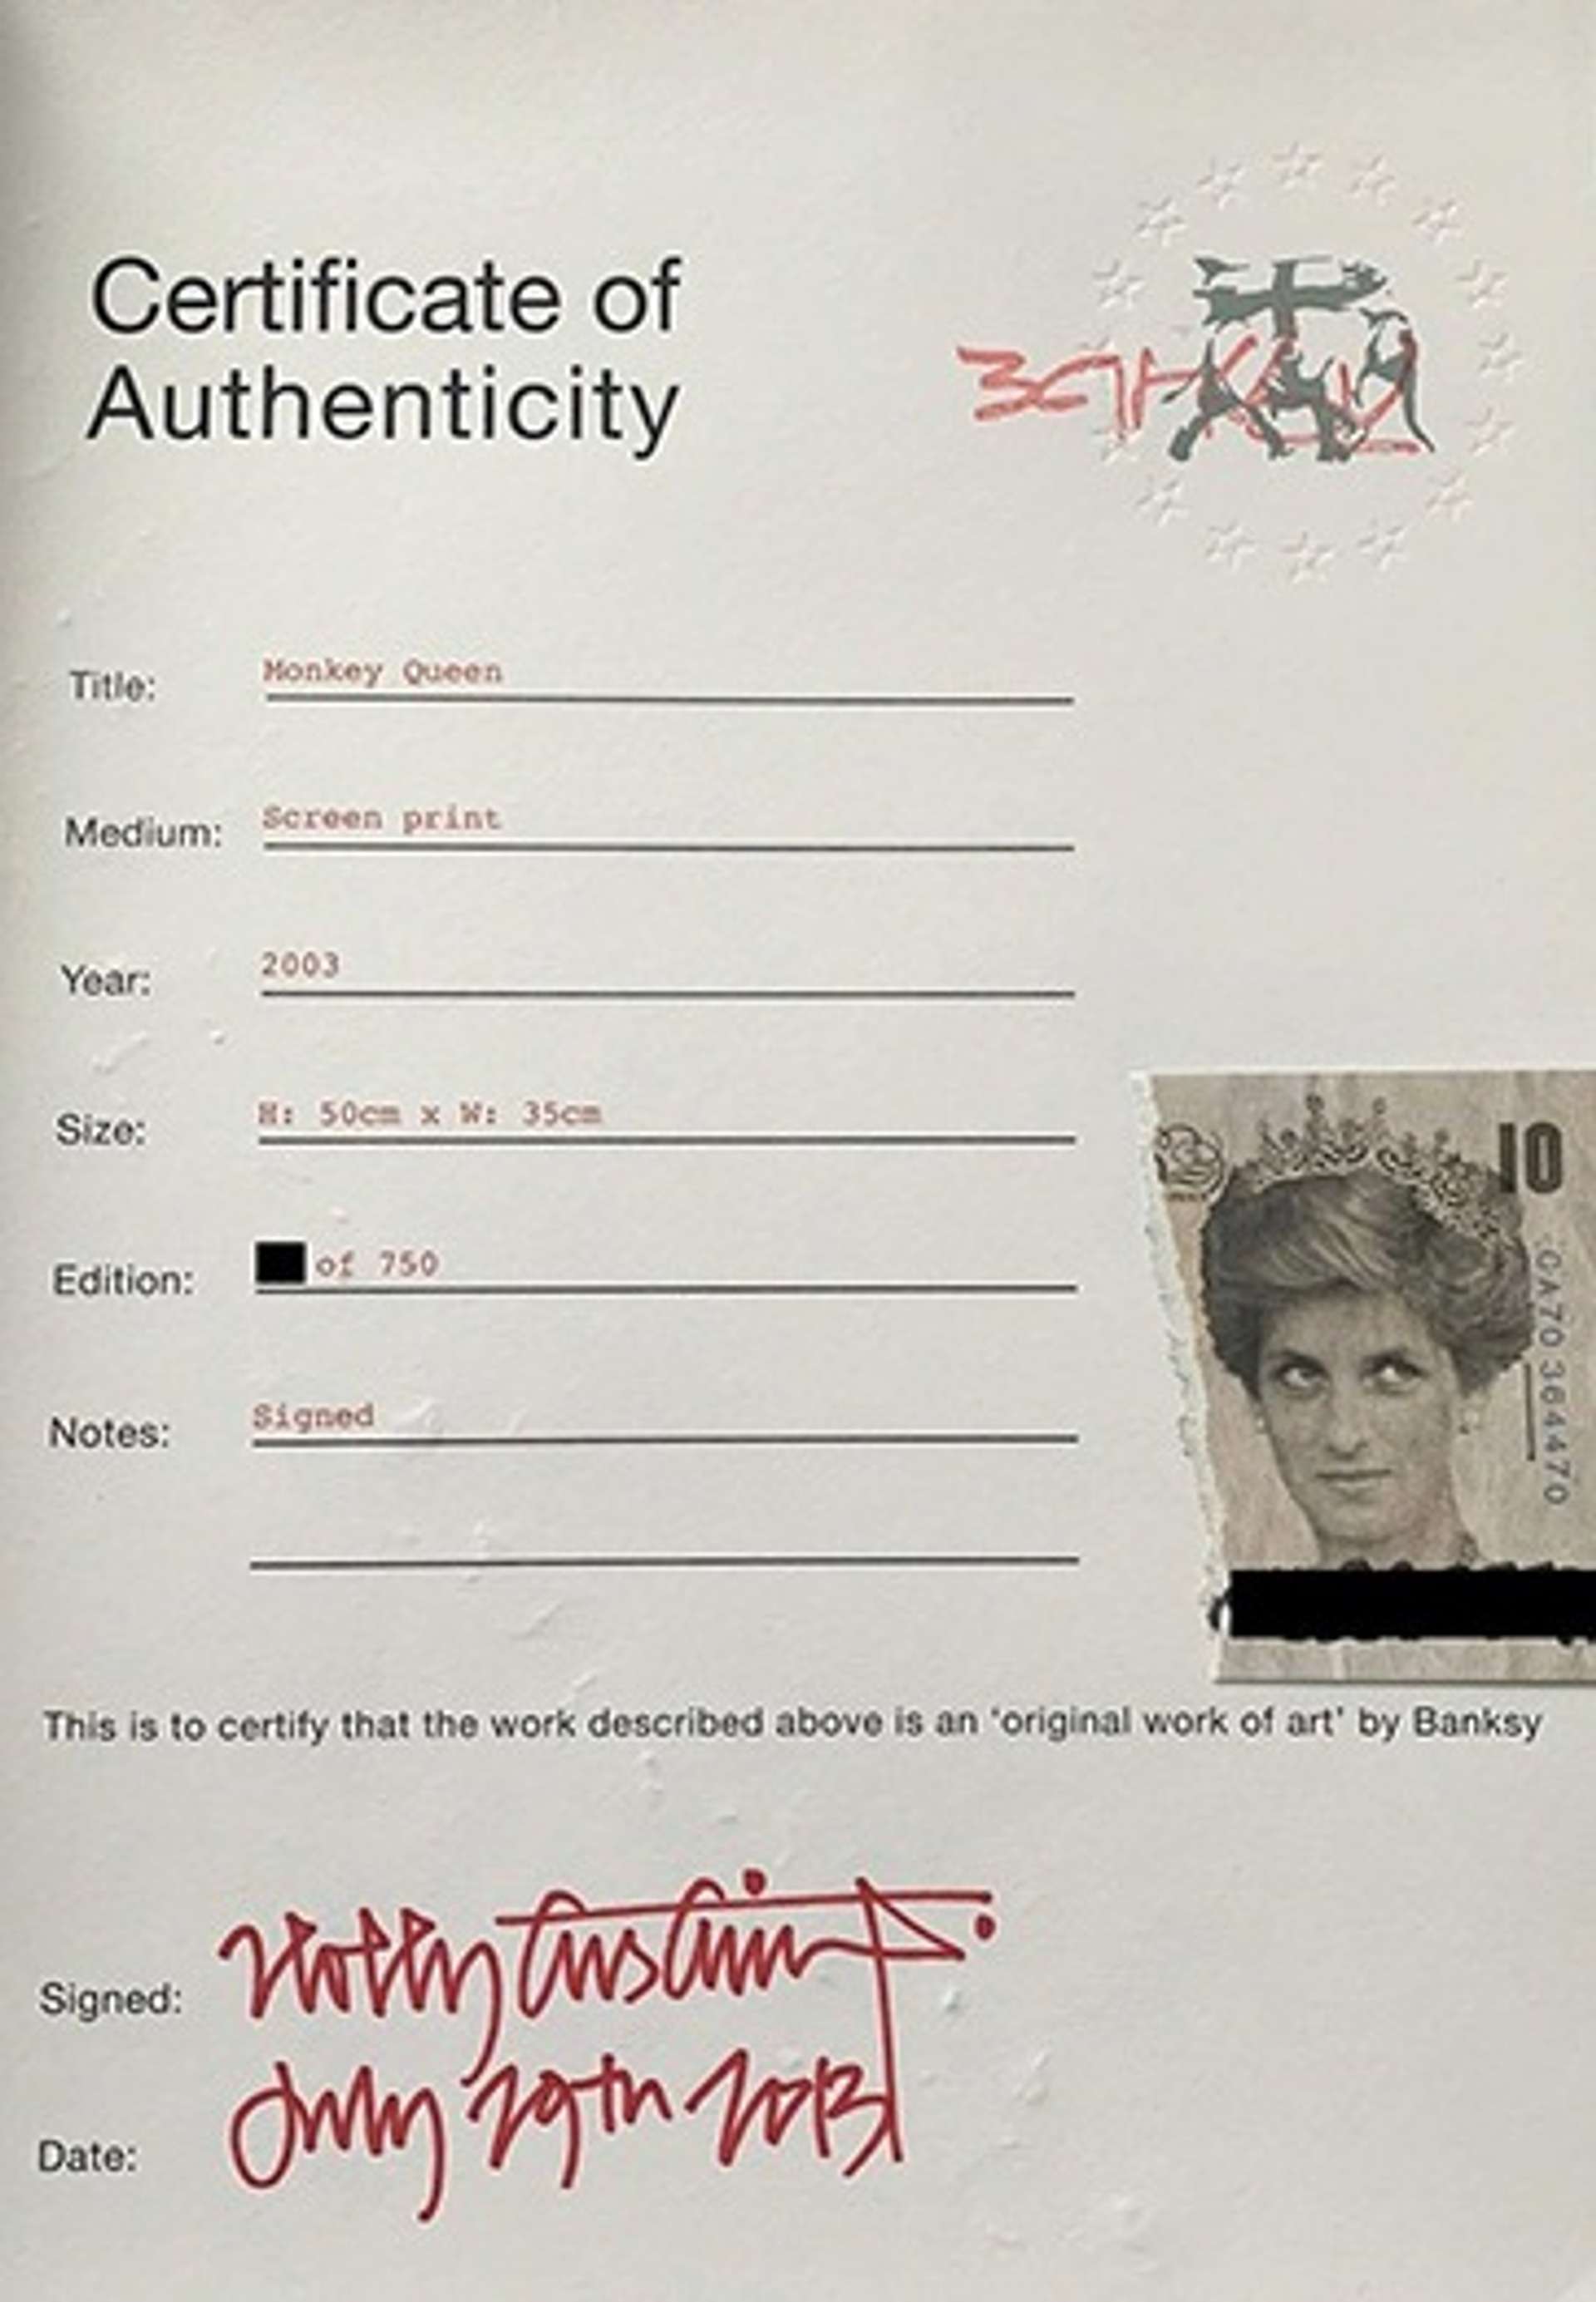 Fake or Real (Authentic, Genuine, etc.) -- Official Authentication